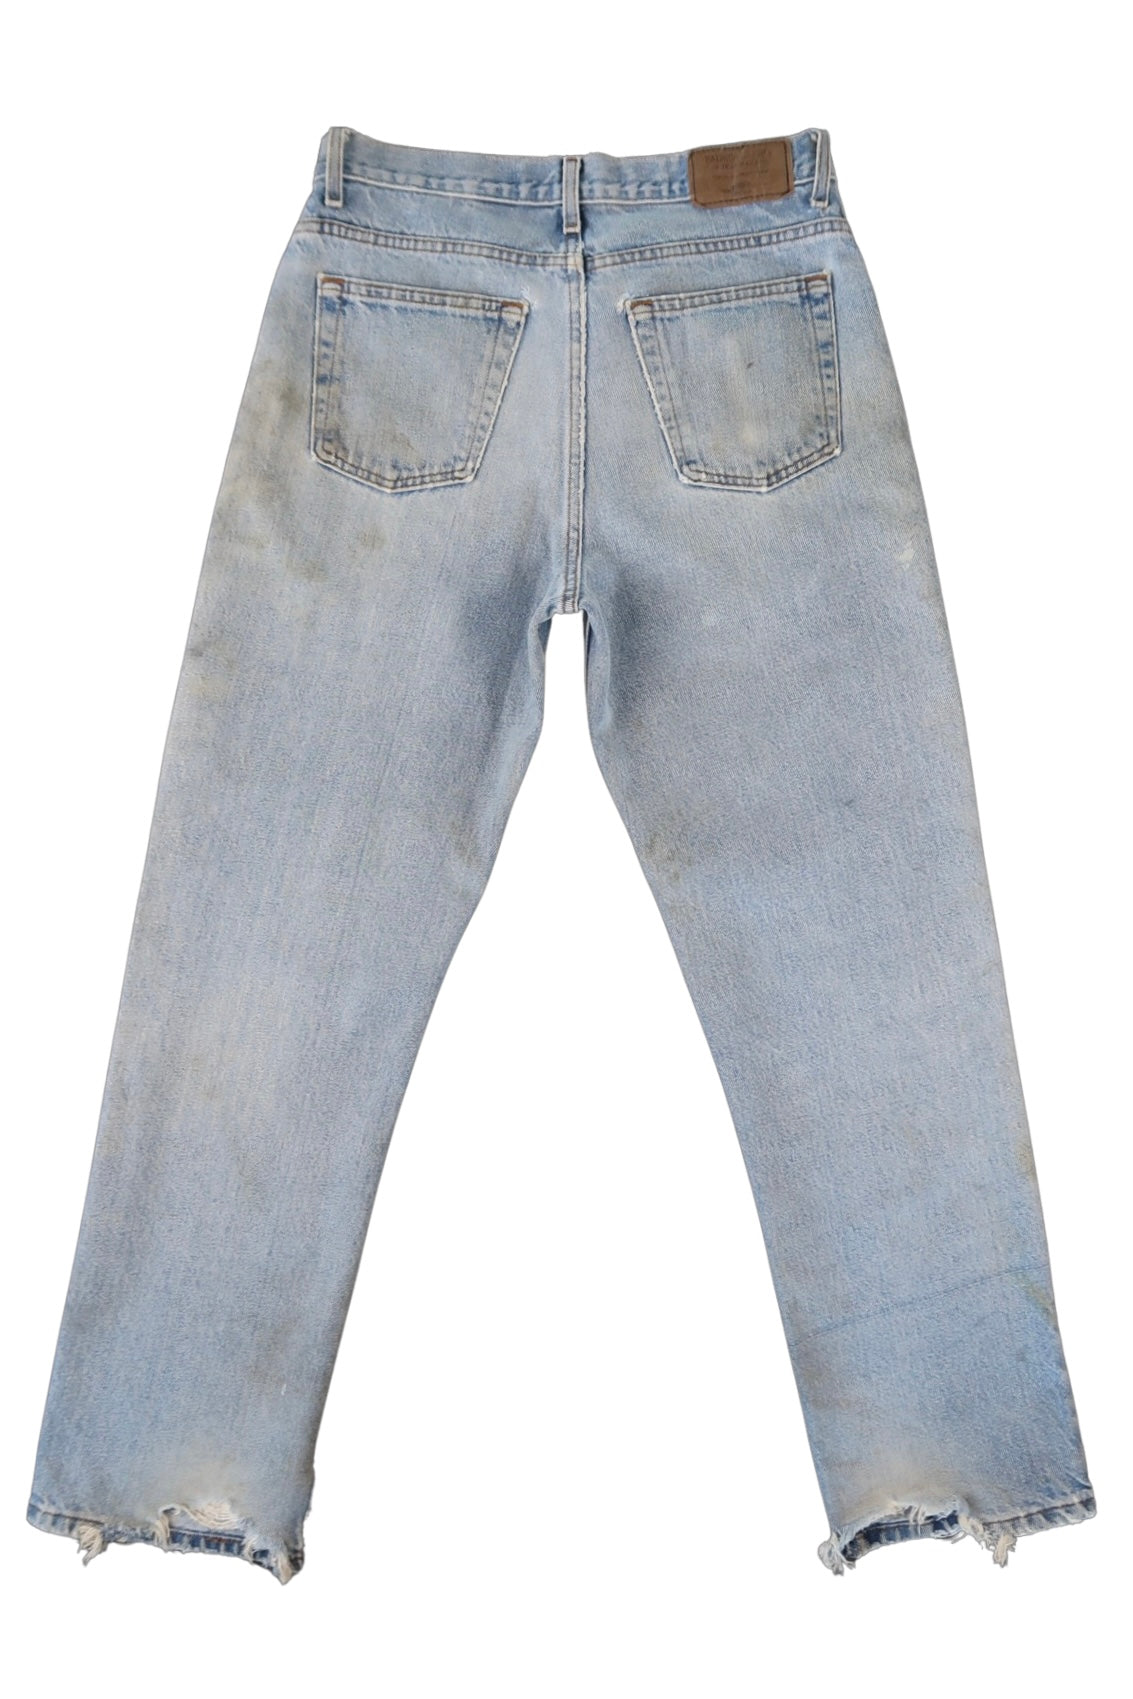 Vintage Faded Glory Jeans